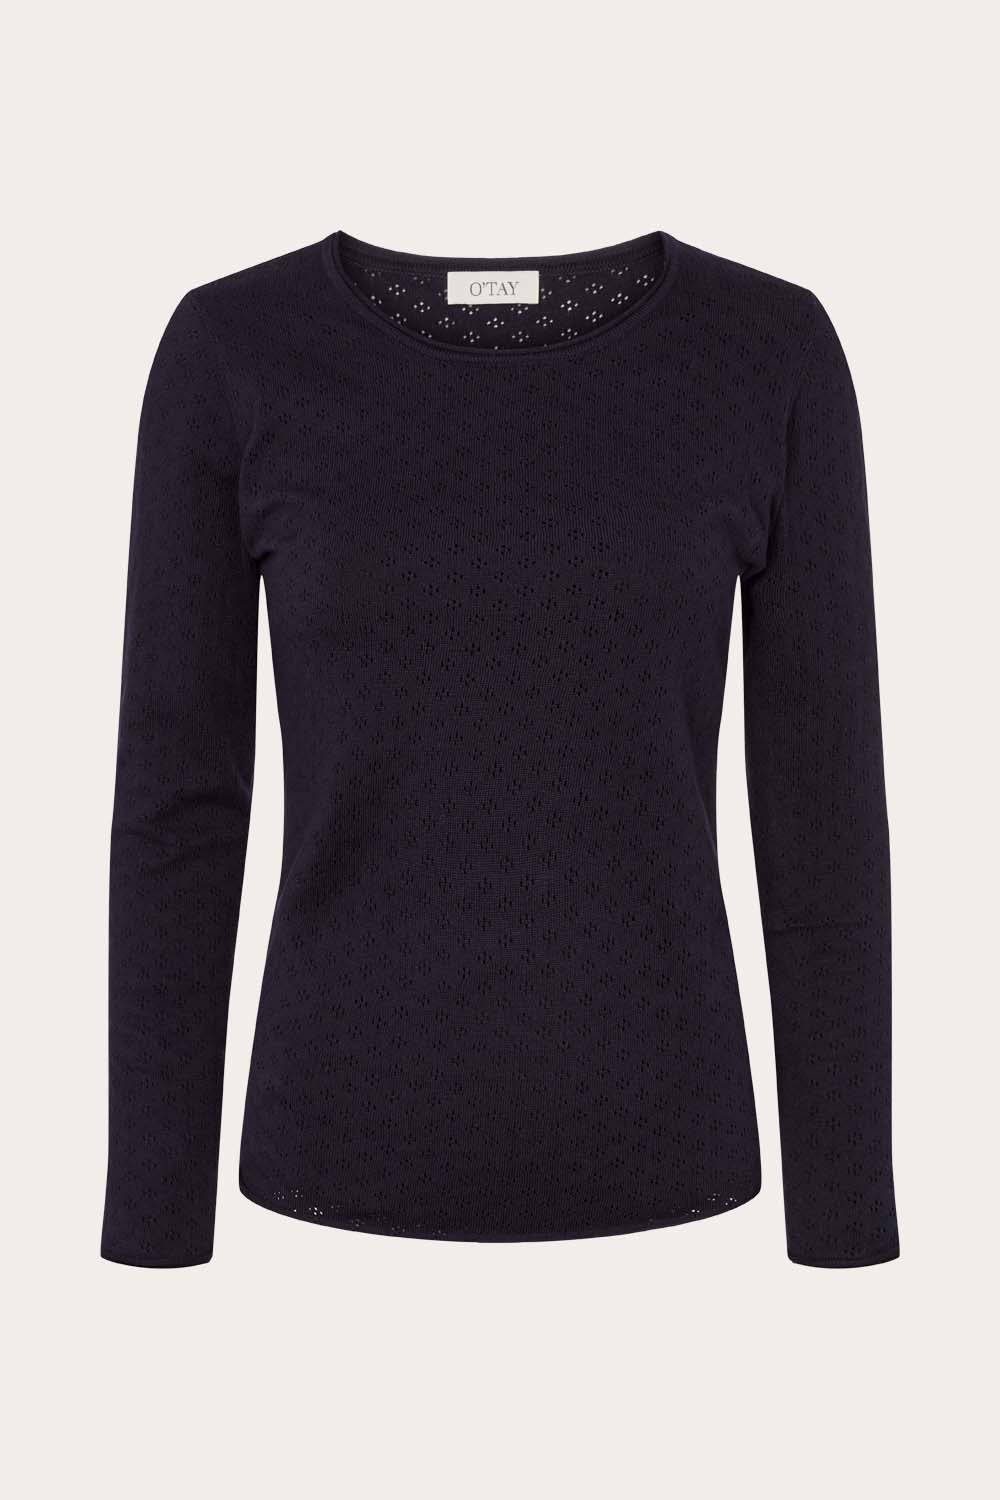 O'TAY Phoebe Blouse Bluser Navy